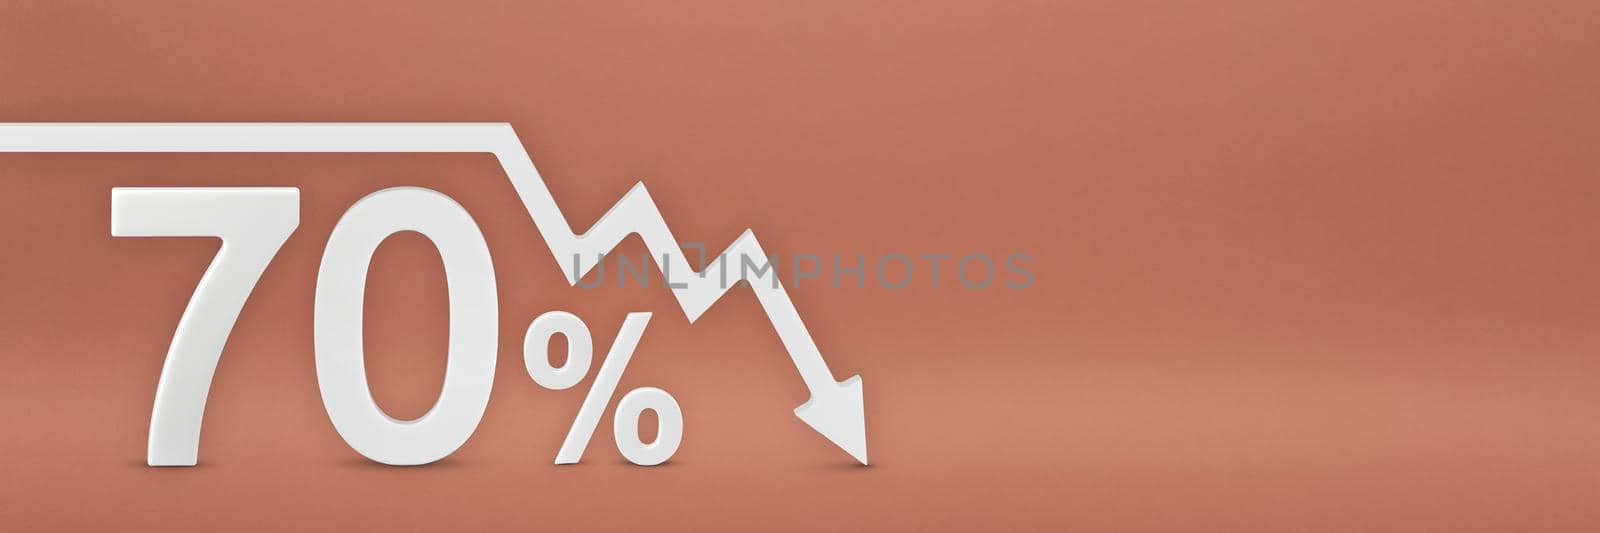 seventy percent, the arrow on the graph is pointing down. Stock market crash, bear market, inflation.Economic collapse, collapse of stocks.3d banner,70 percent discount sign on a red background